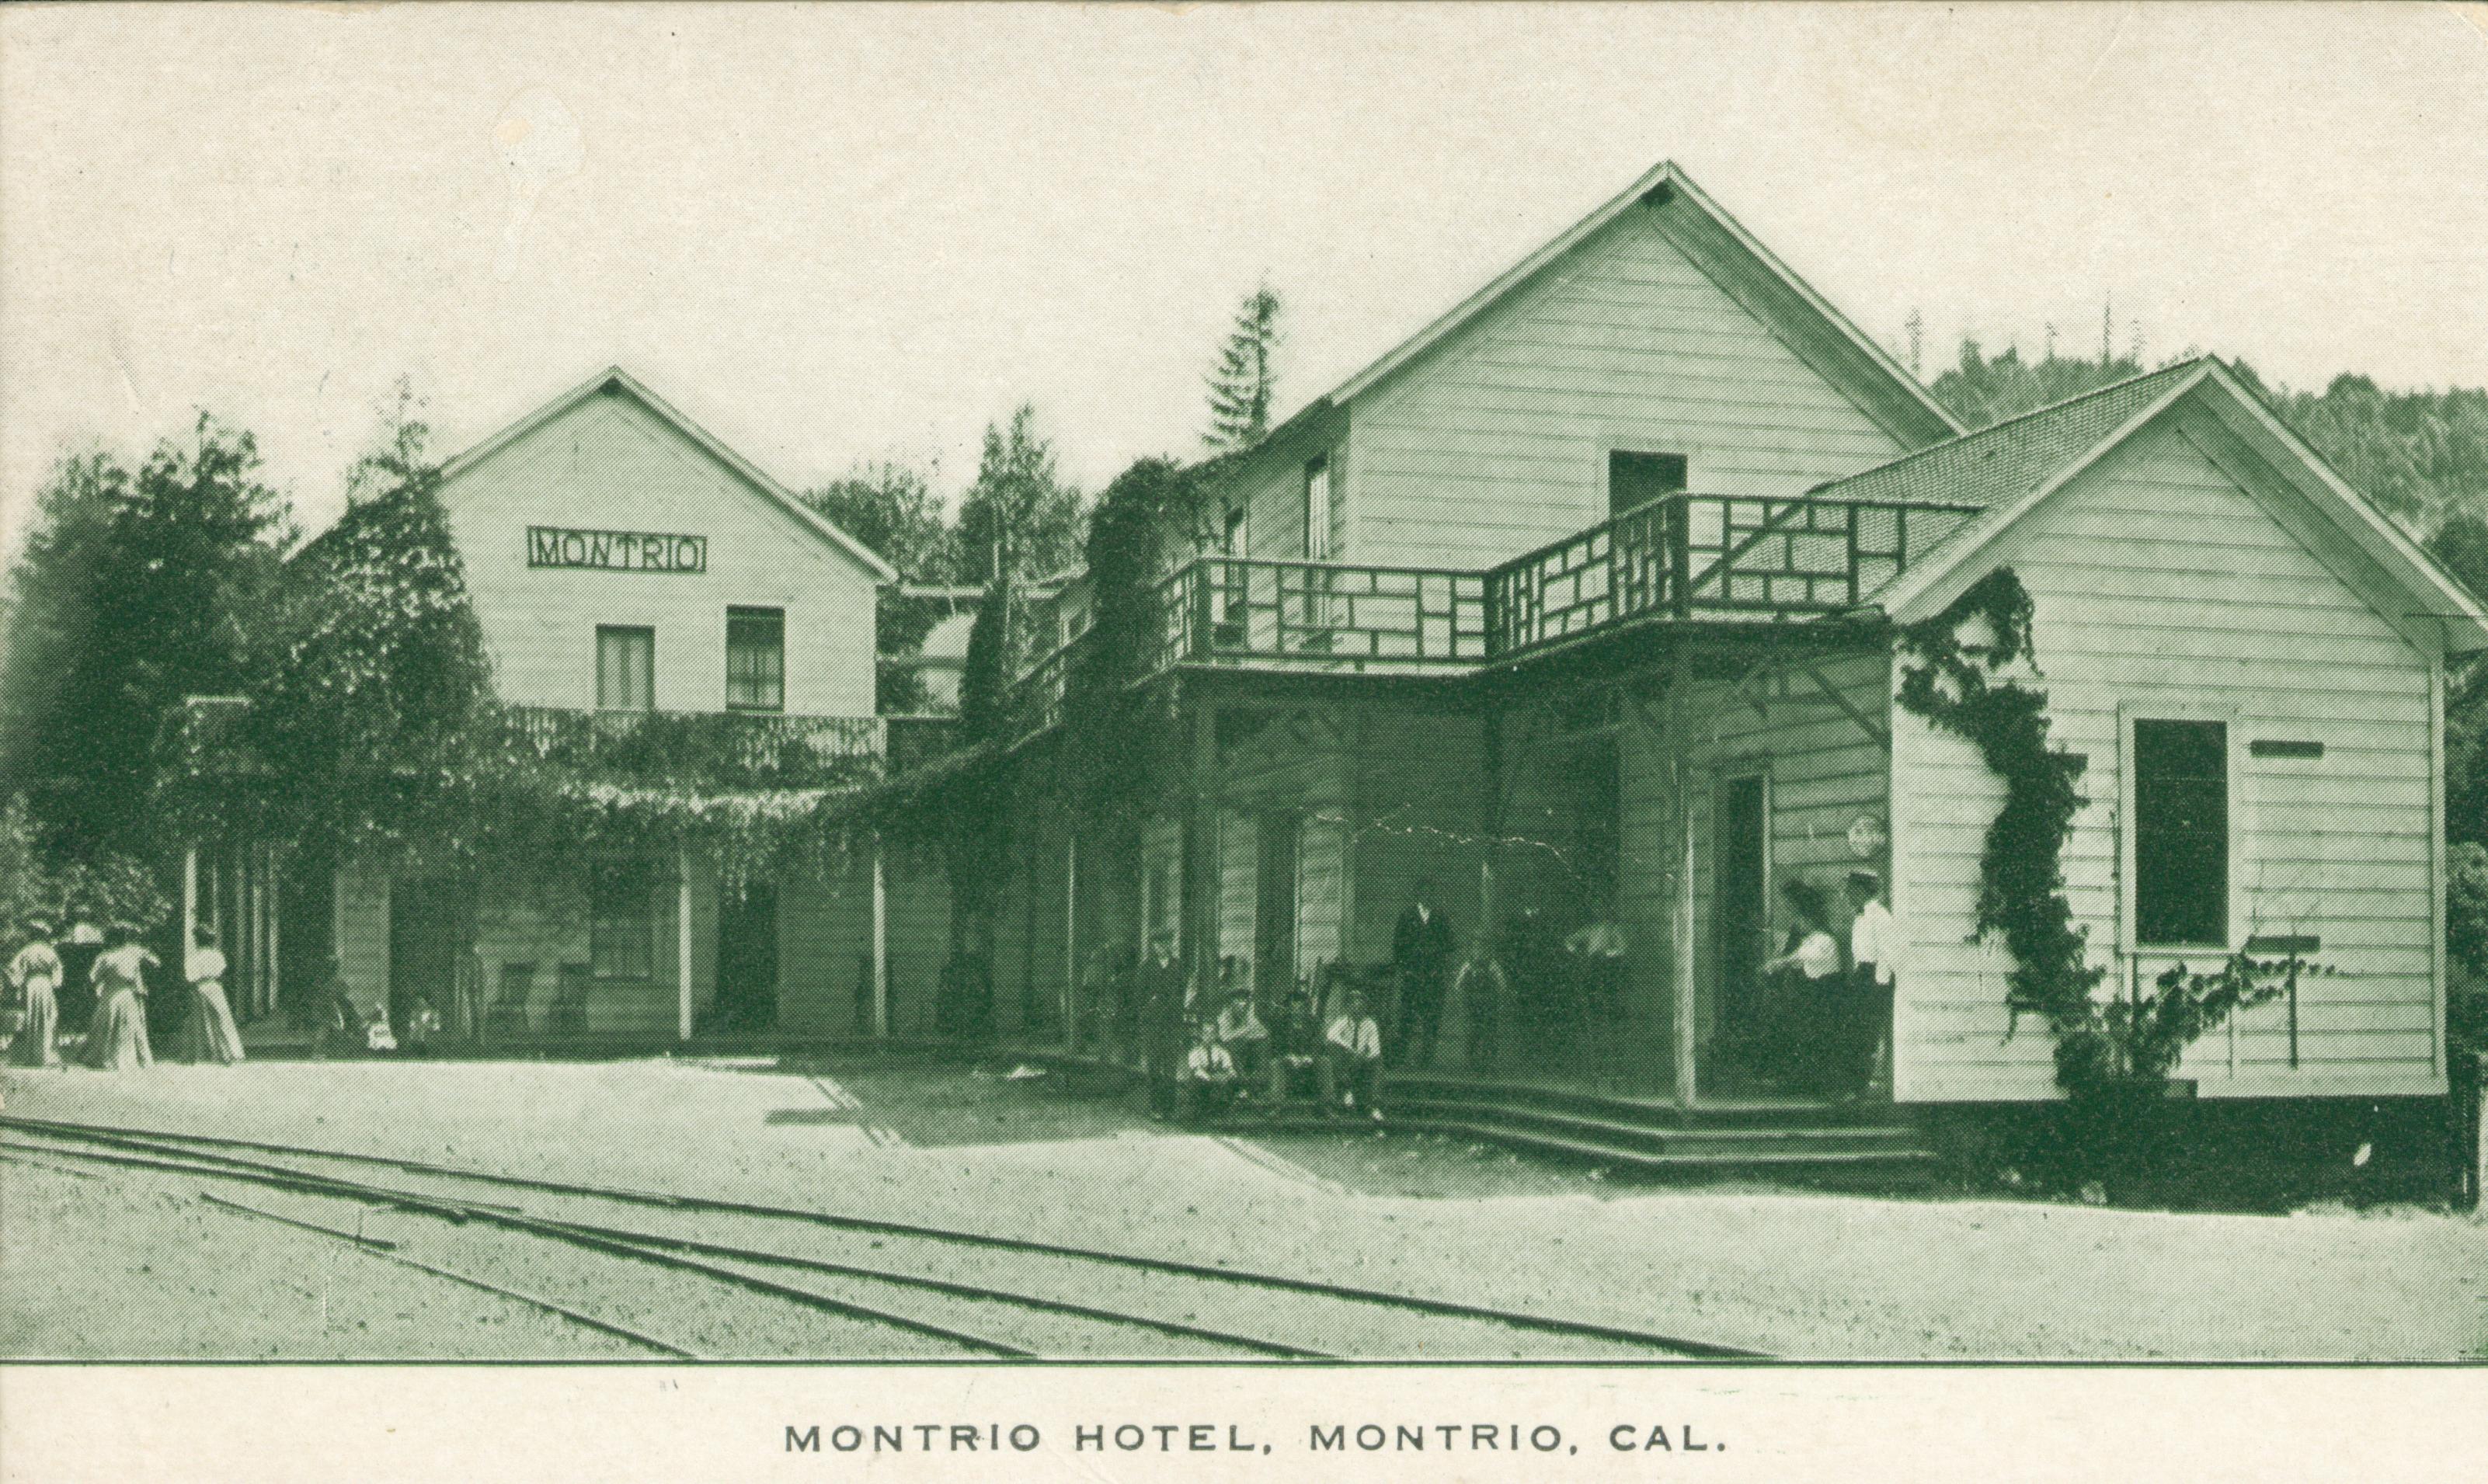 Shows a view of the Montrio Hotel with several people seated on the porch.